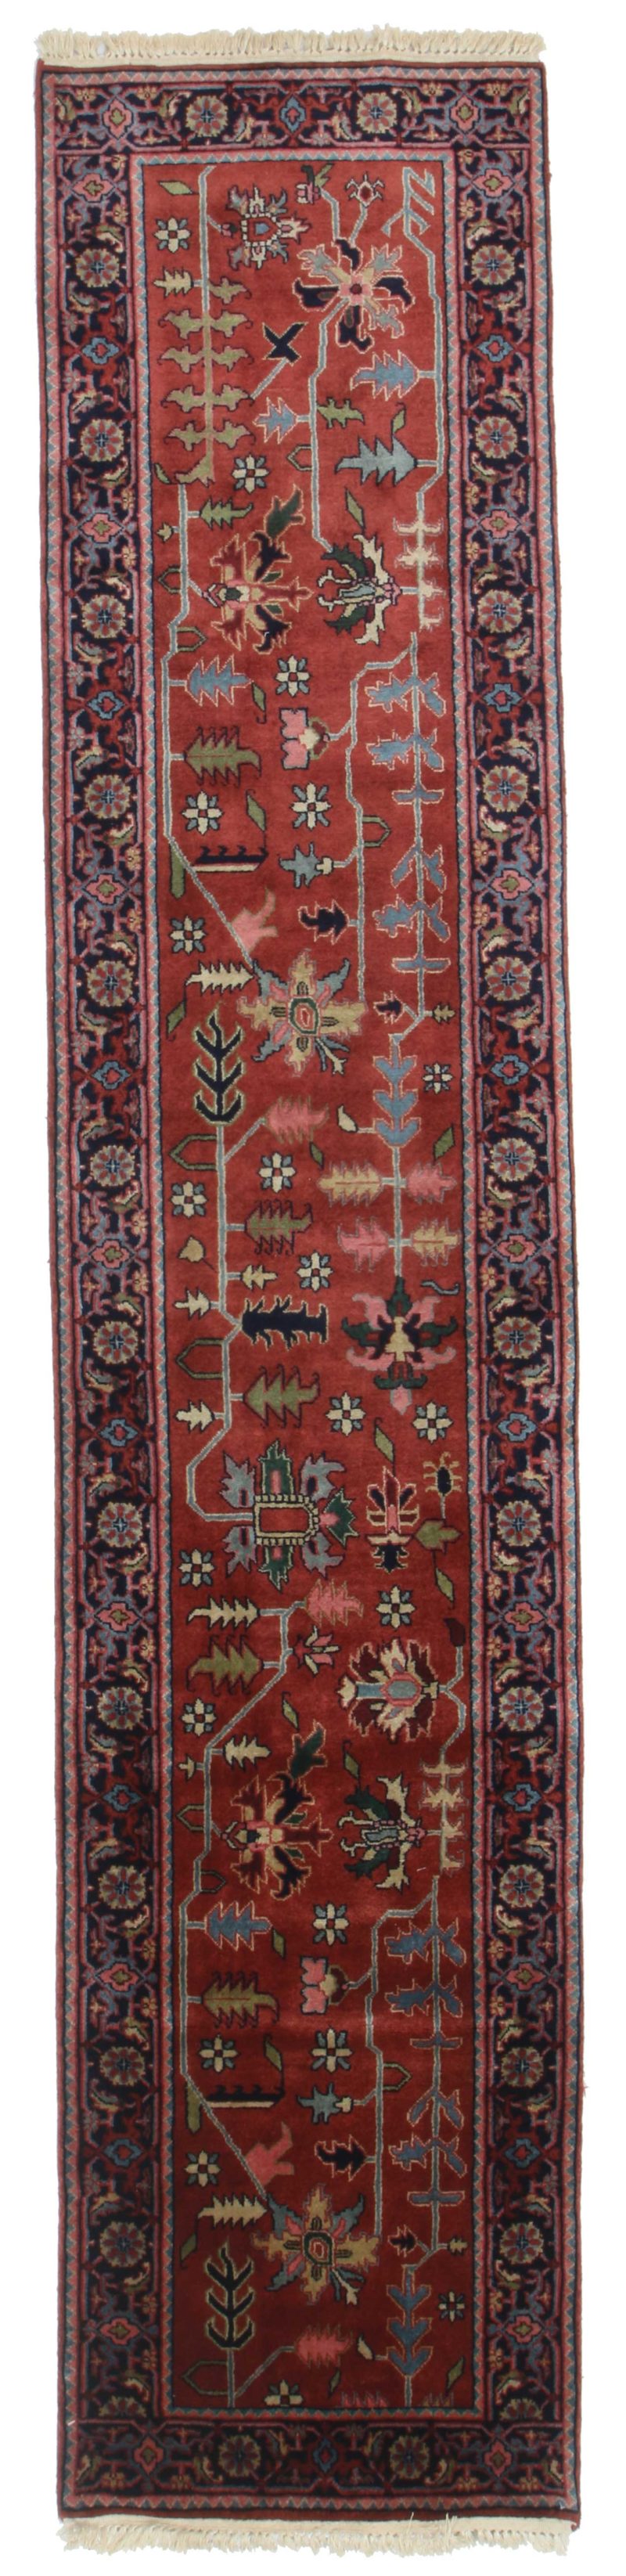 2' 7" x 12 1" Vintage Persian Style Runner 9995